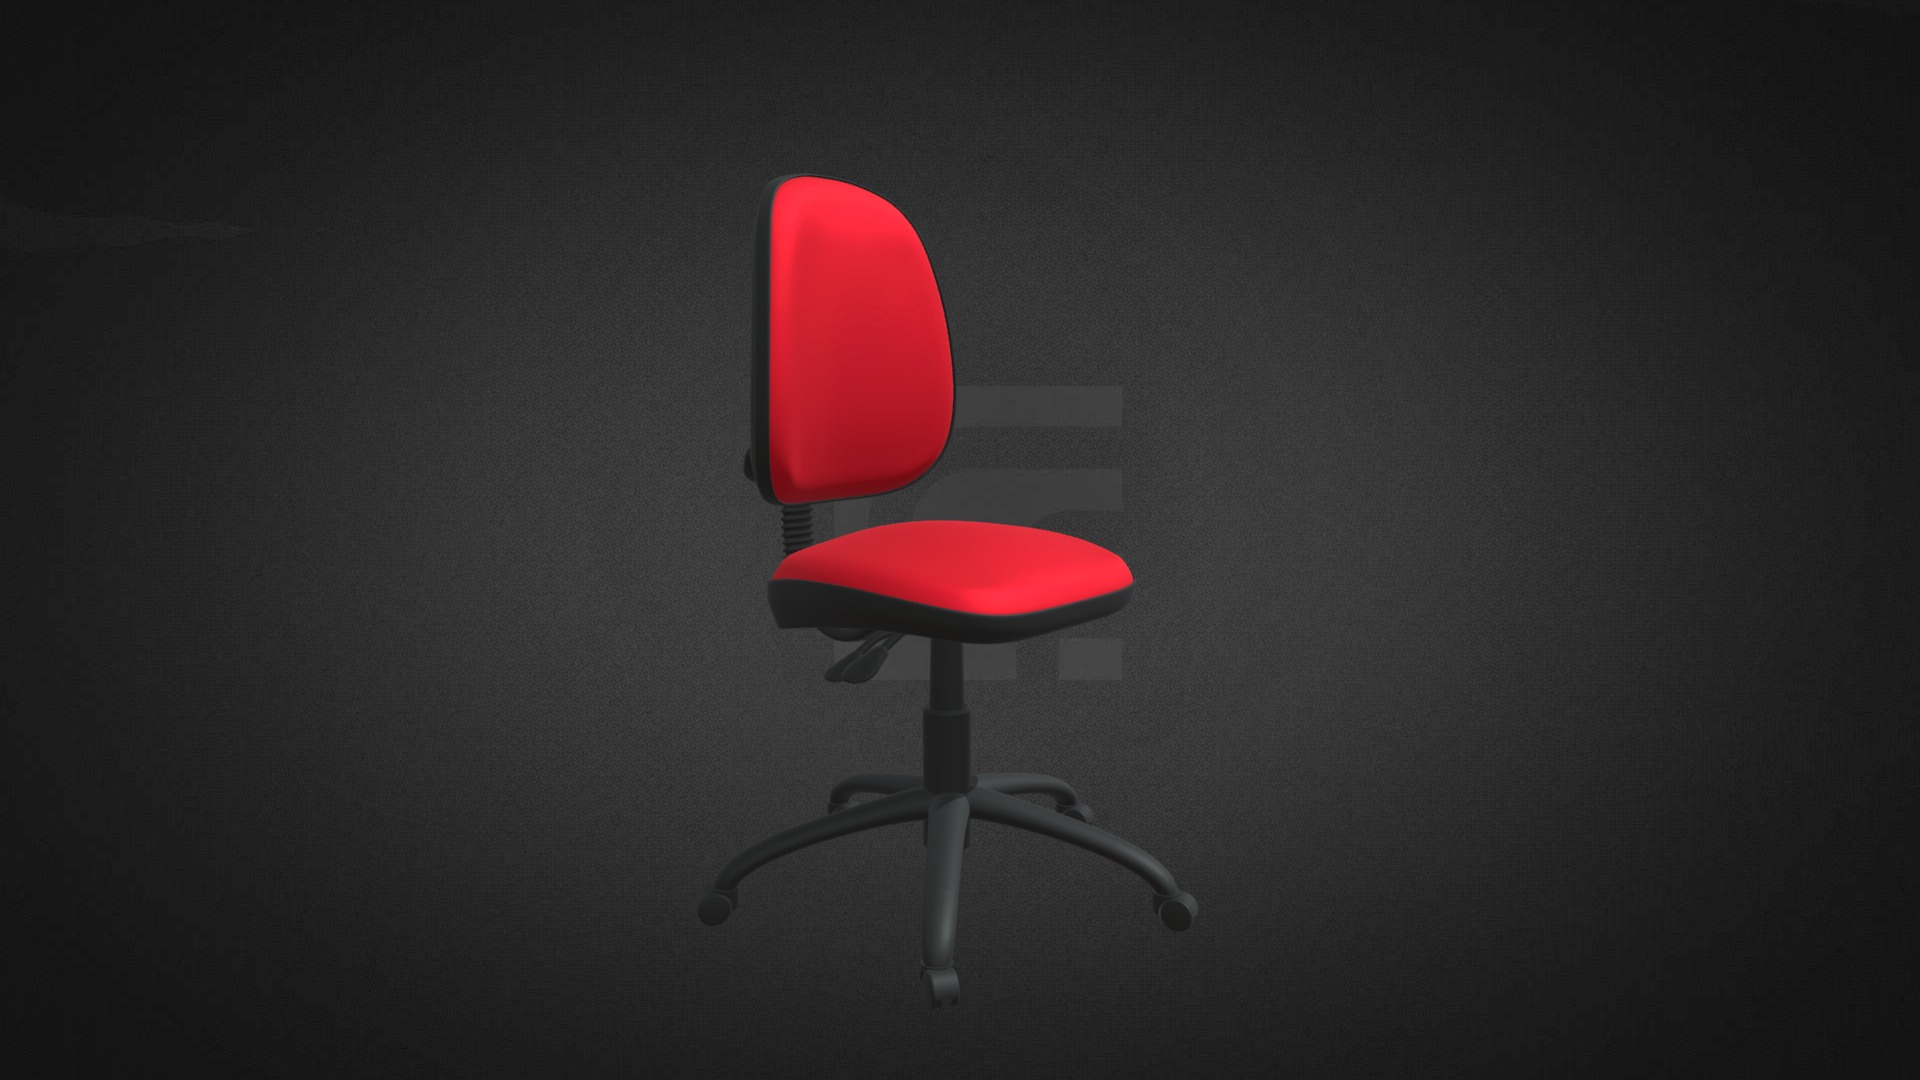 3D model Operators Chair Hire - This is a 3D model of the Operators Chair Hire. The 3D model is about a red chair on a black surface.